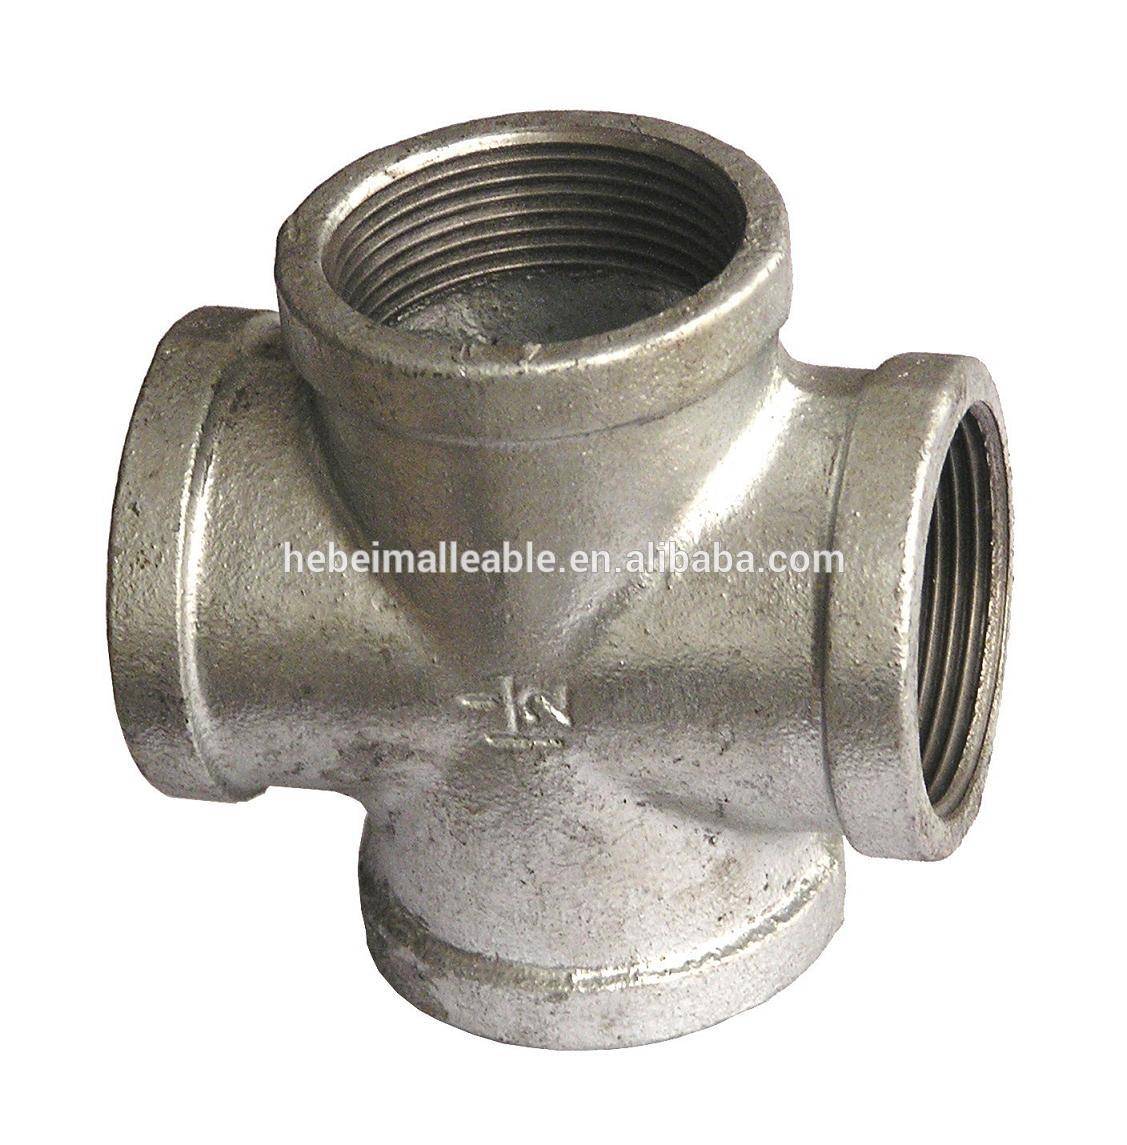 QXM brand BS standard beaded galvanized cast iron four way pipe fitting elbow cross bend reducer flange